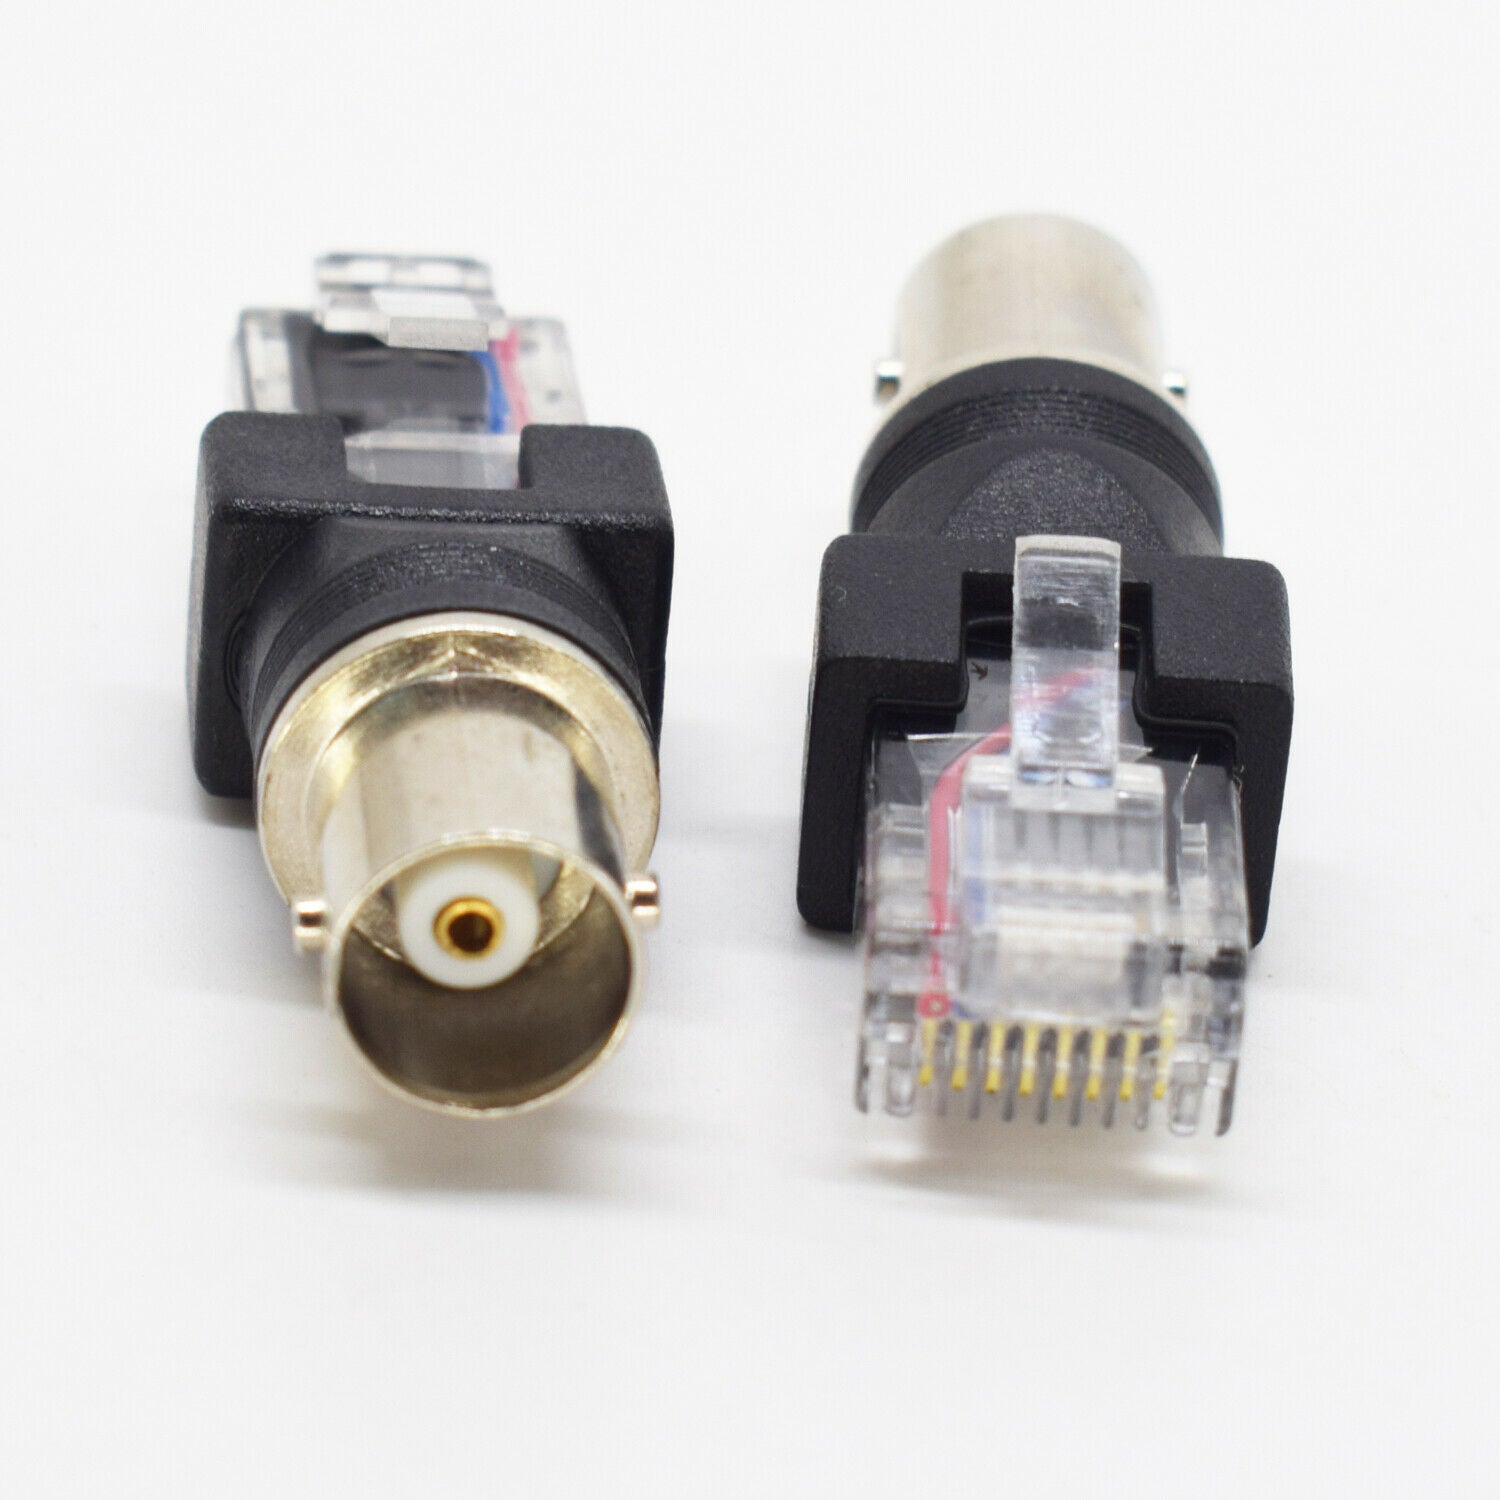 1pc BNC Female to RJ45 Plug Adapter Coaxial Barrel Coupler Adapter Connector